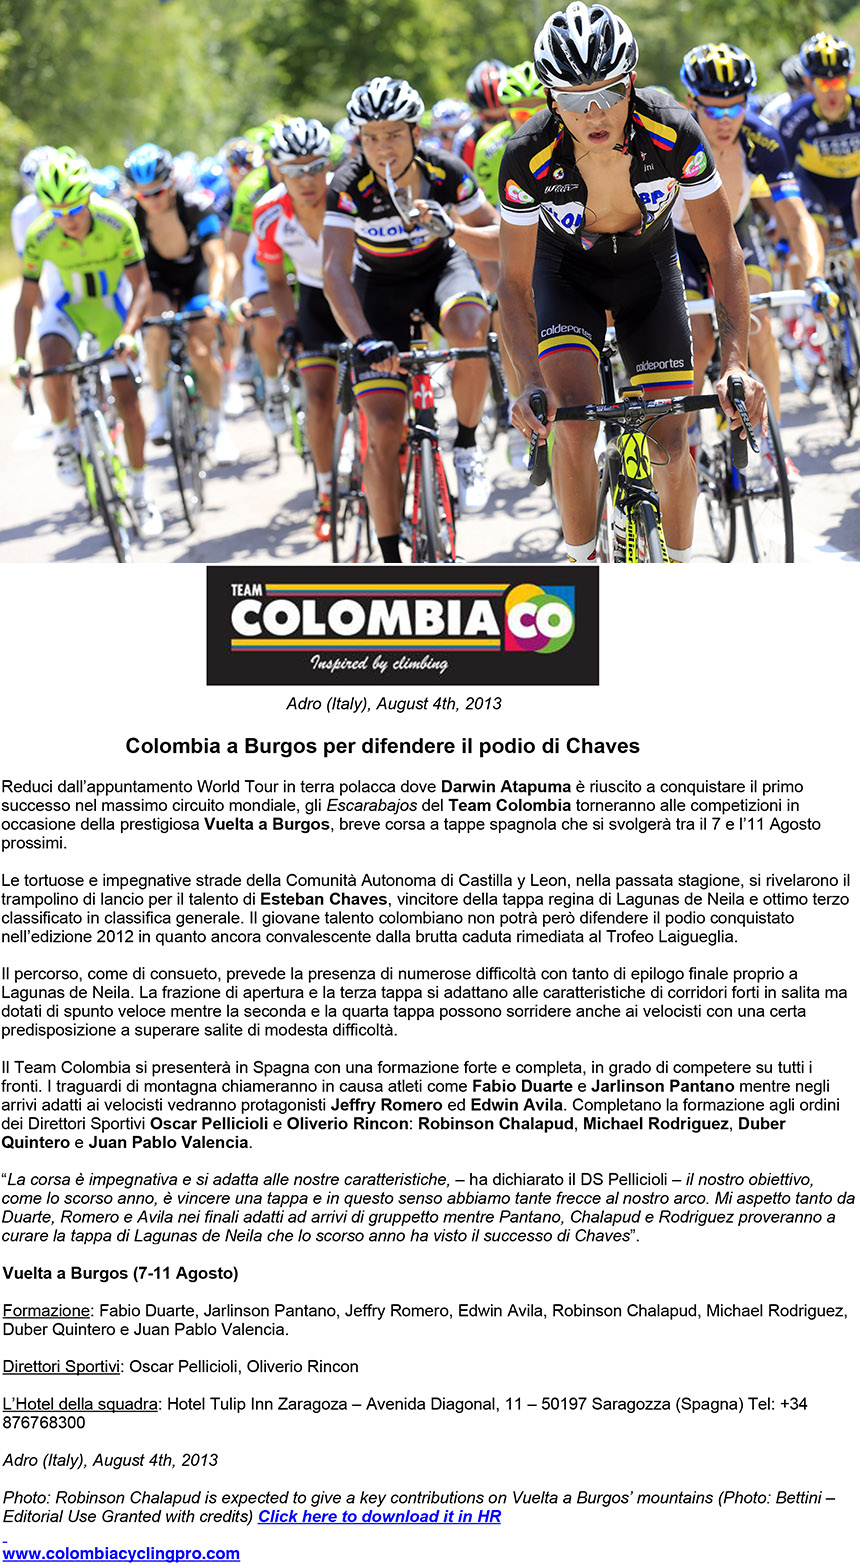 COLOMBIA NEWS